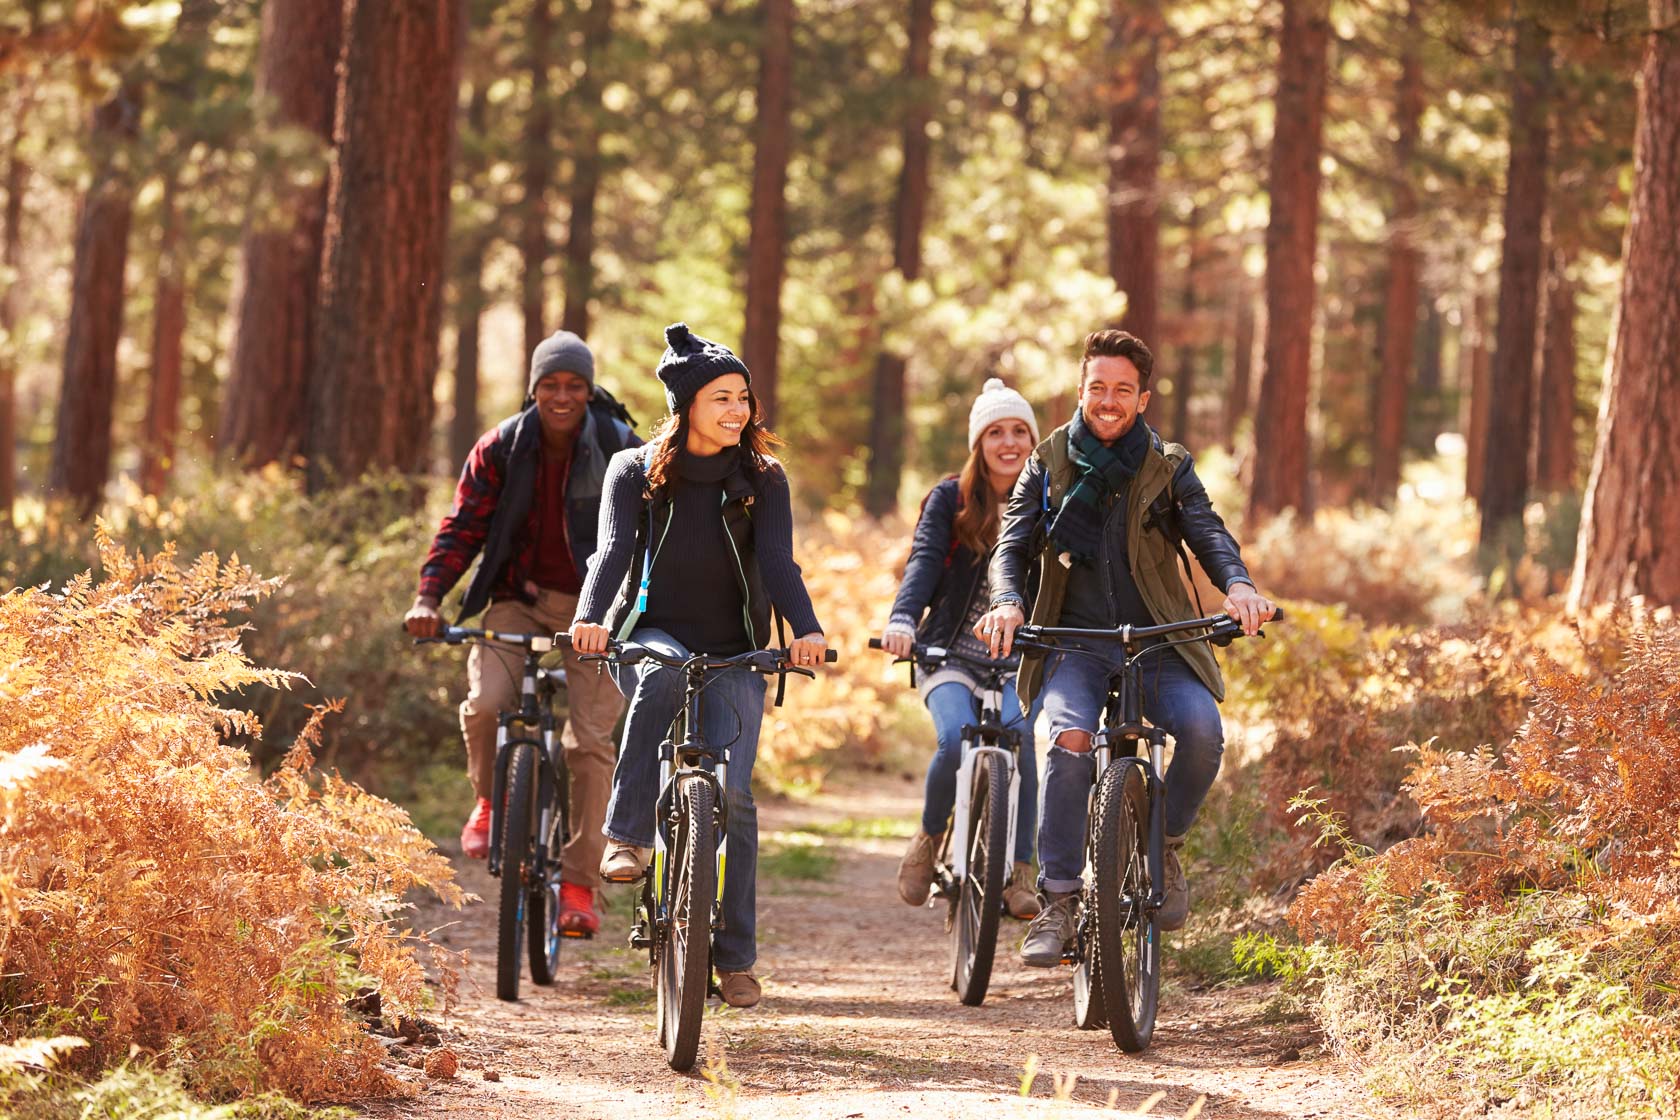 4 people riding a bike in a forest